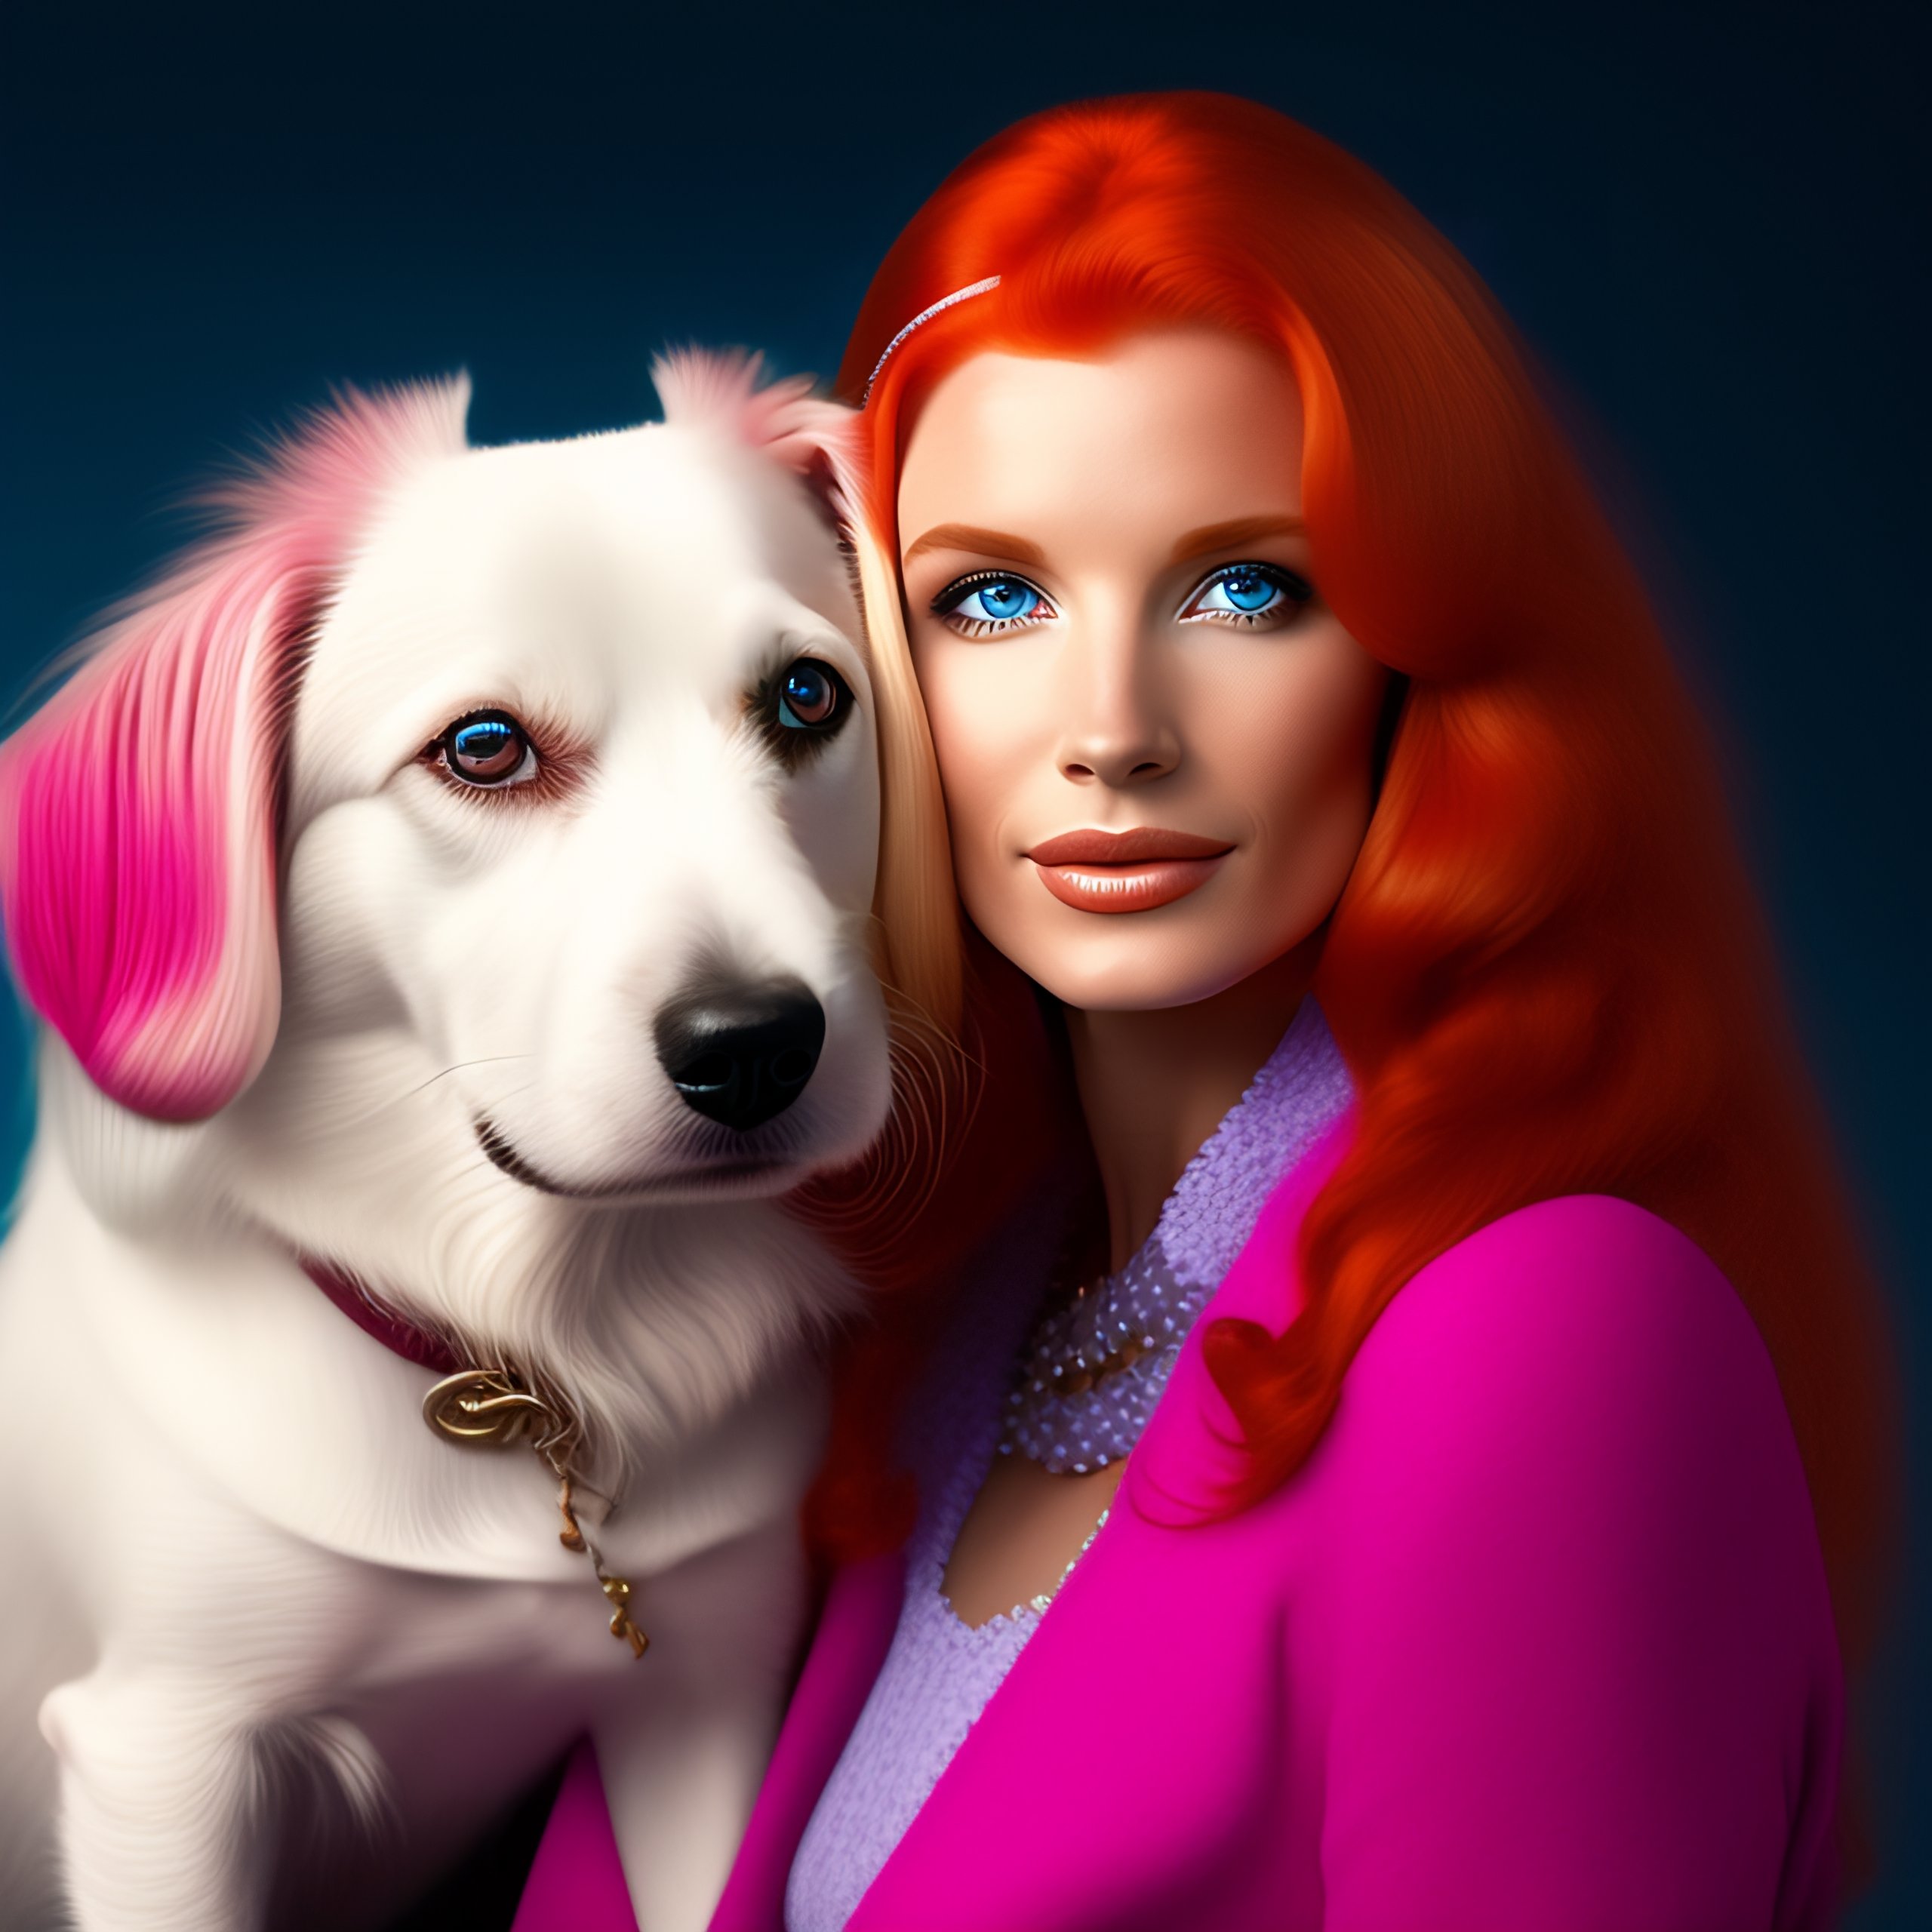 Lexica Cute Blue Eyed Long Haired Redhead Woman Next To A White Jack Russell Terrier Pink